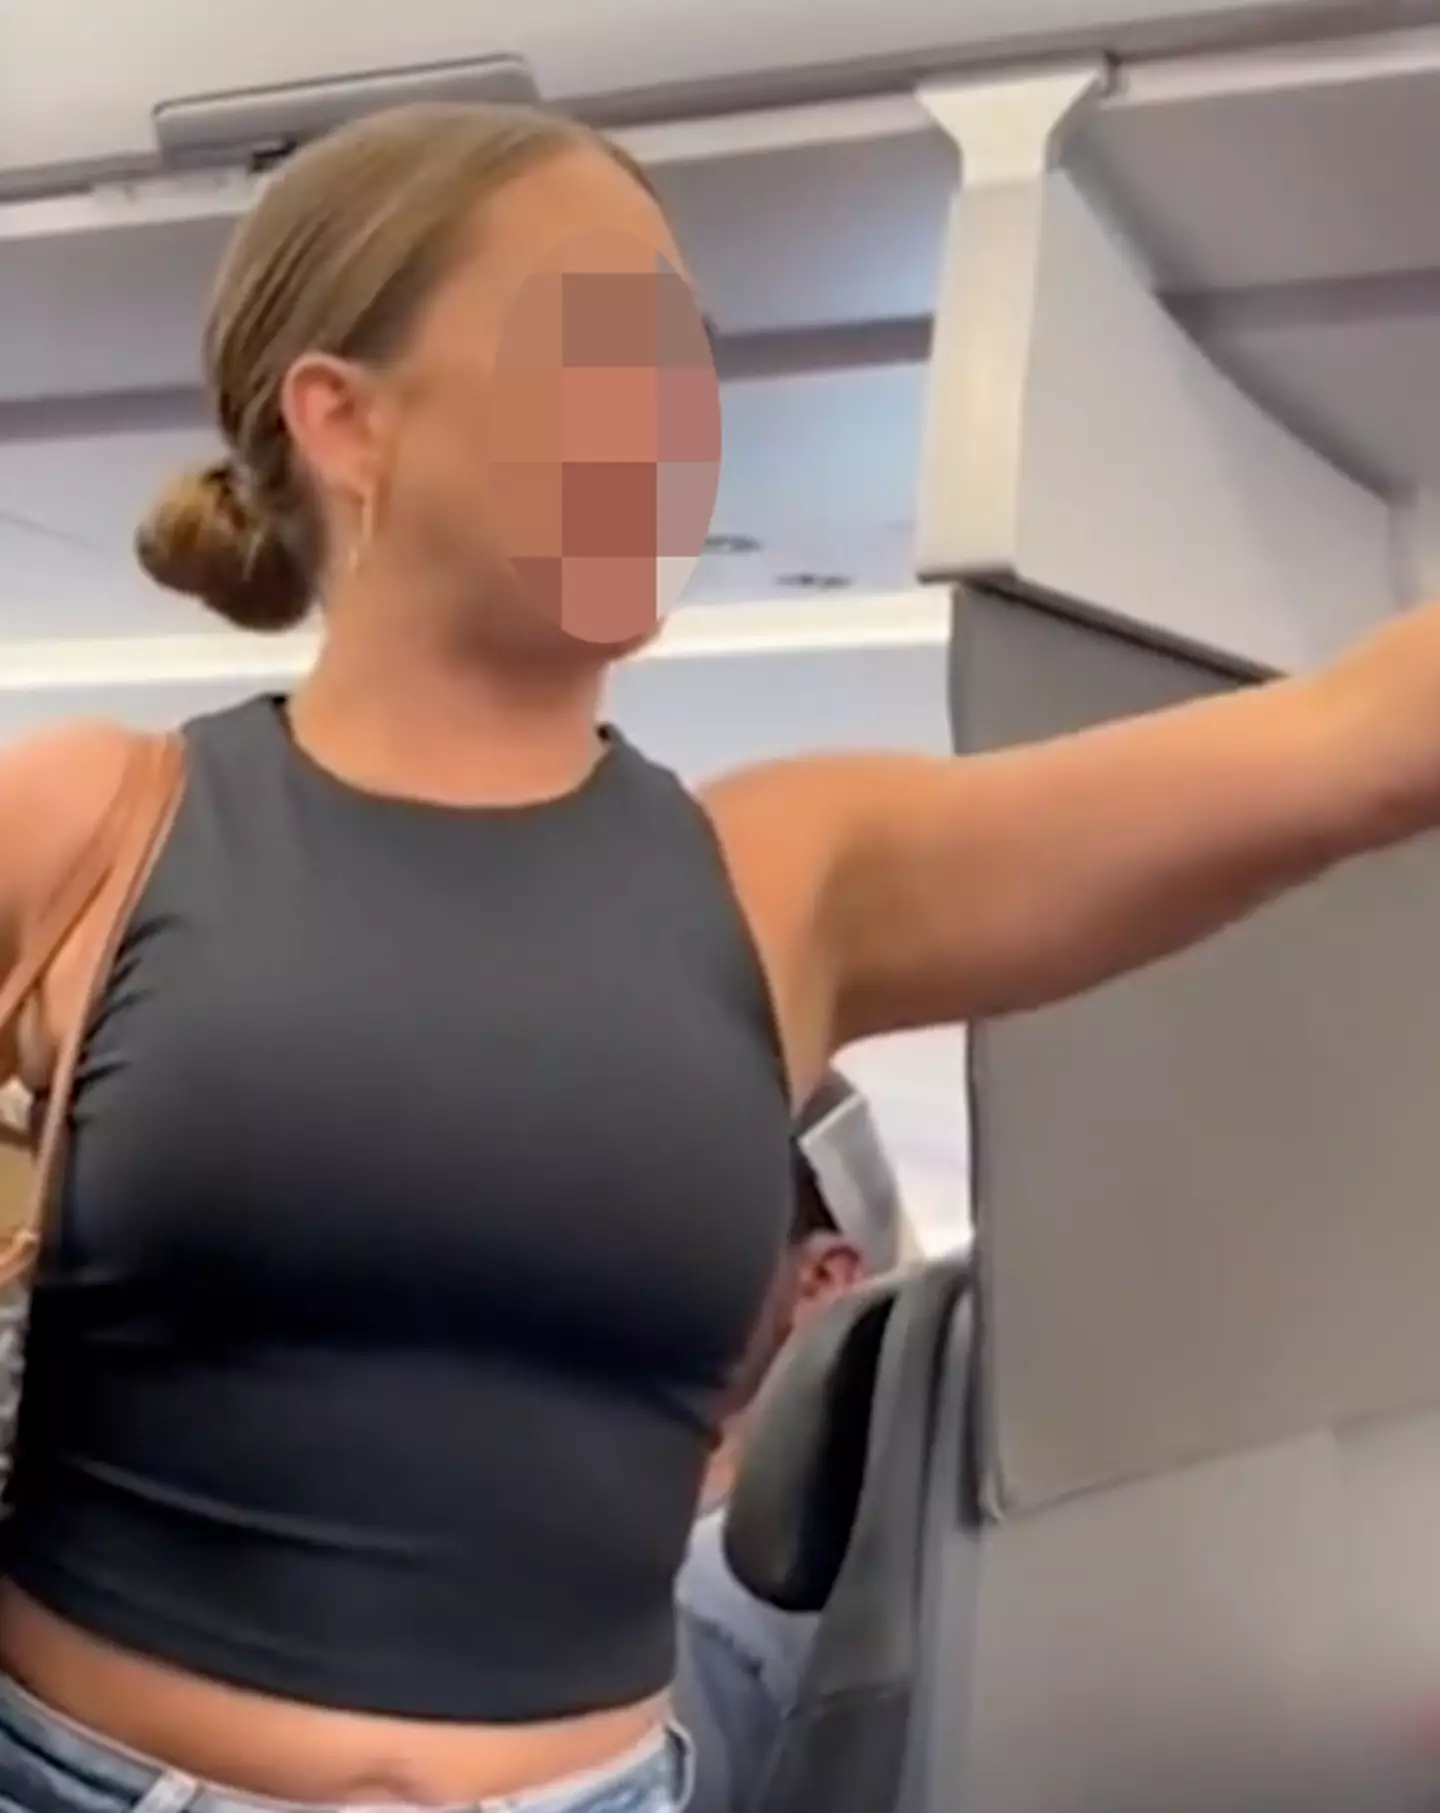 The woman was distressed about an 'imaginary passenger' on board the plane.